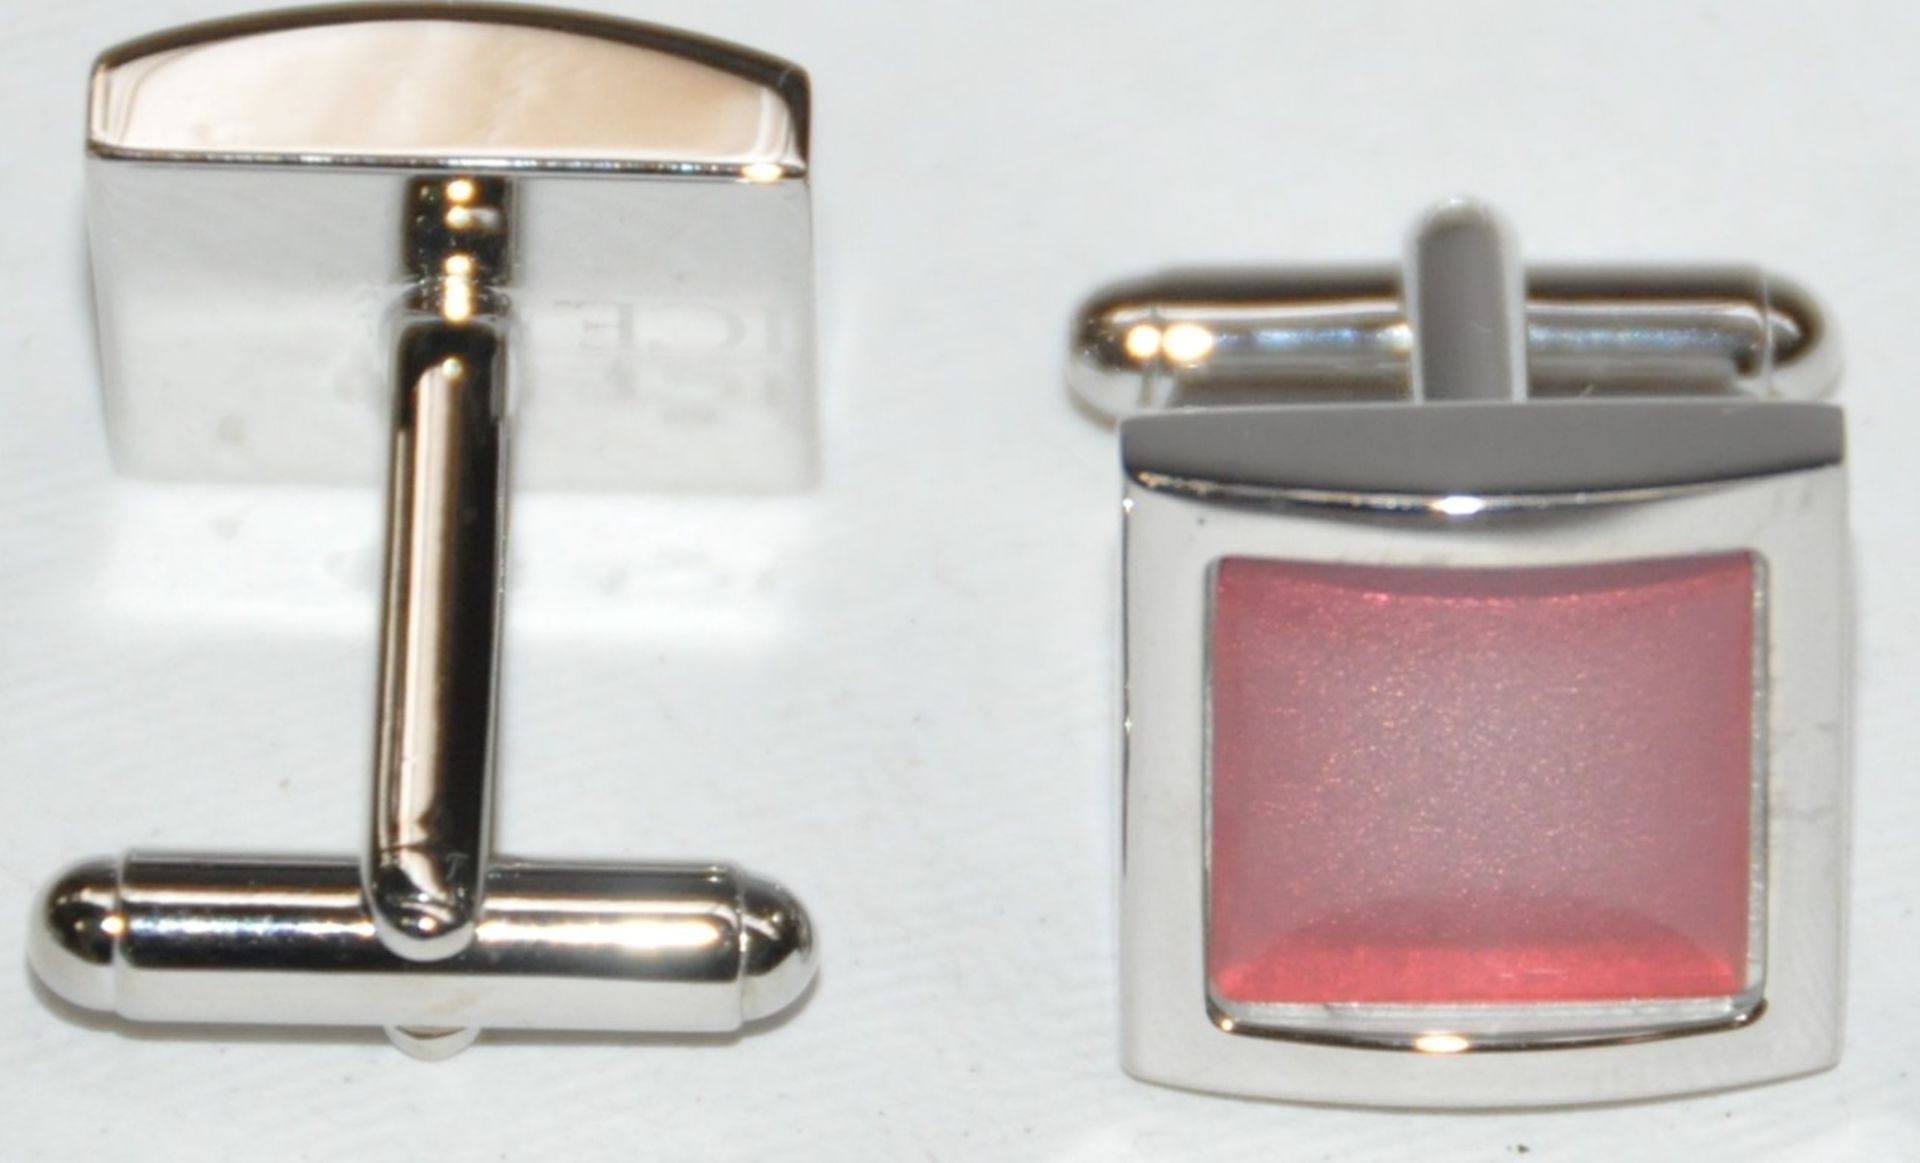 9 x Pairs of Genuine ZZ Mirror CUFFLINKS by Ice London – Silver Plated With PINK Coloured Inlay –